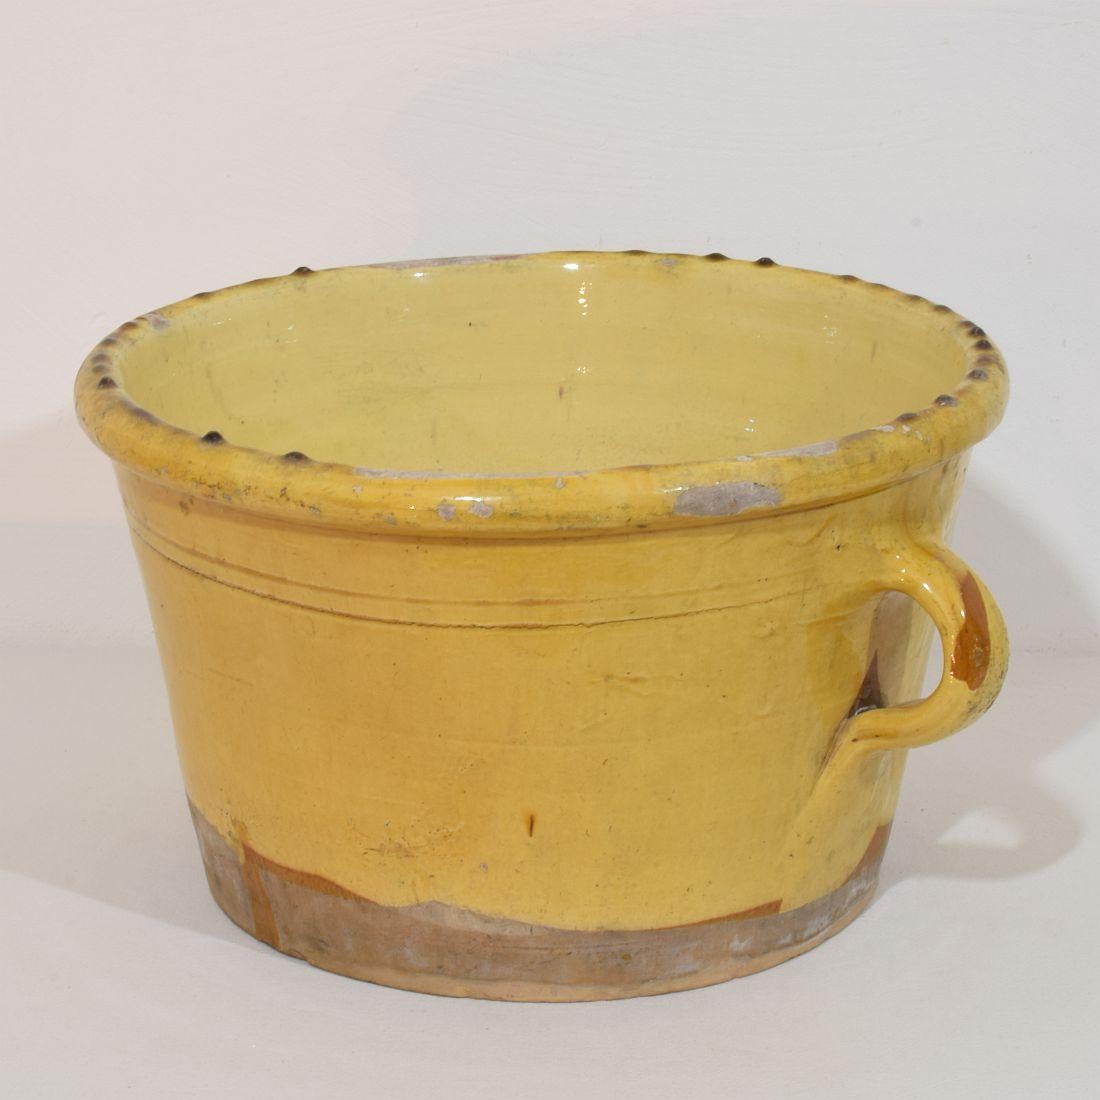 Extremely rare and large French yellow glazed ceramic Kitchen pot. 
Beautiful rich and warm color. 
France circa 1850-1900
Weathered.